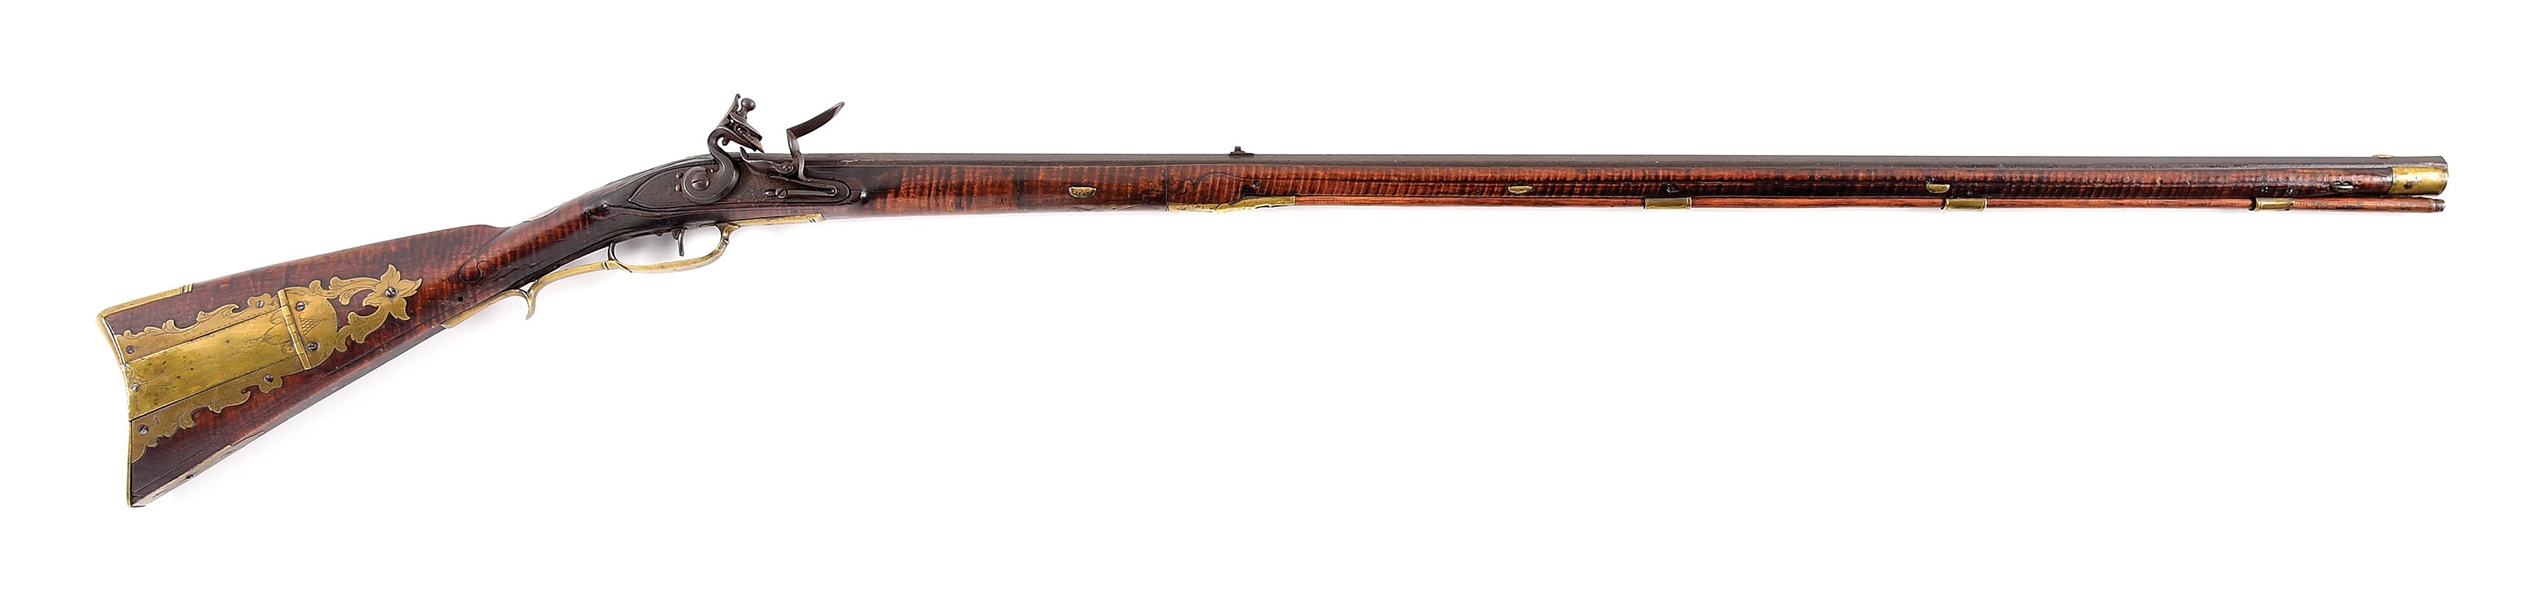 (A) RAISED CARVED FLINTLOCK KENTUCKY RIFLE SIGNED J. METZGER, EX. JOE KINDIG, PICTURED AS NO. 215